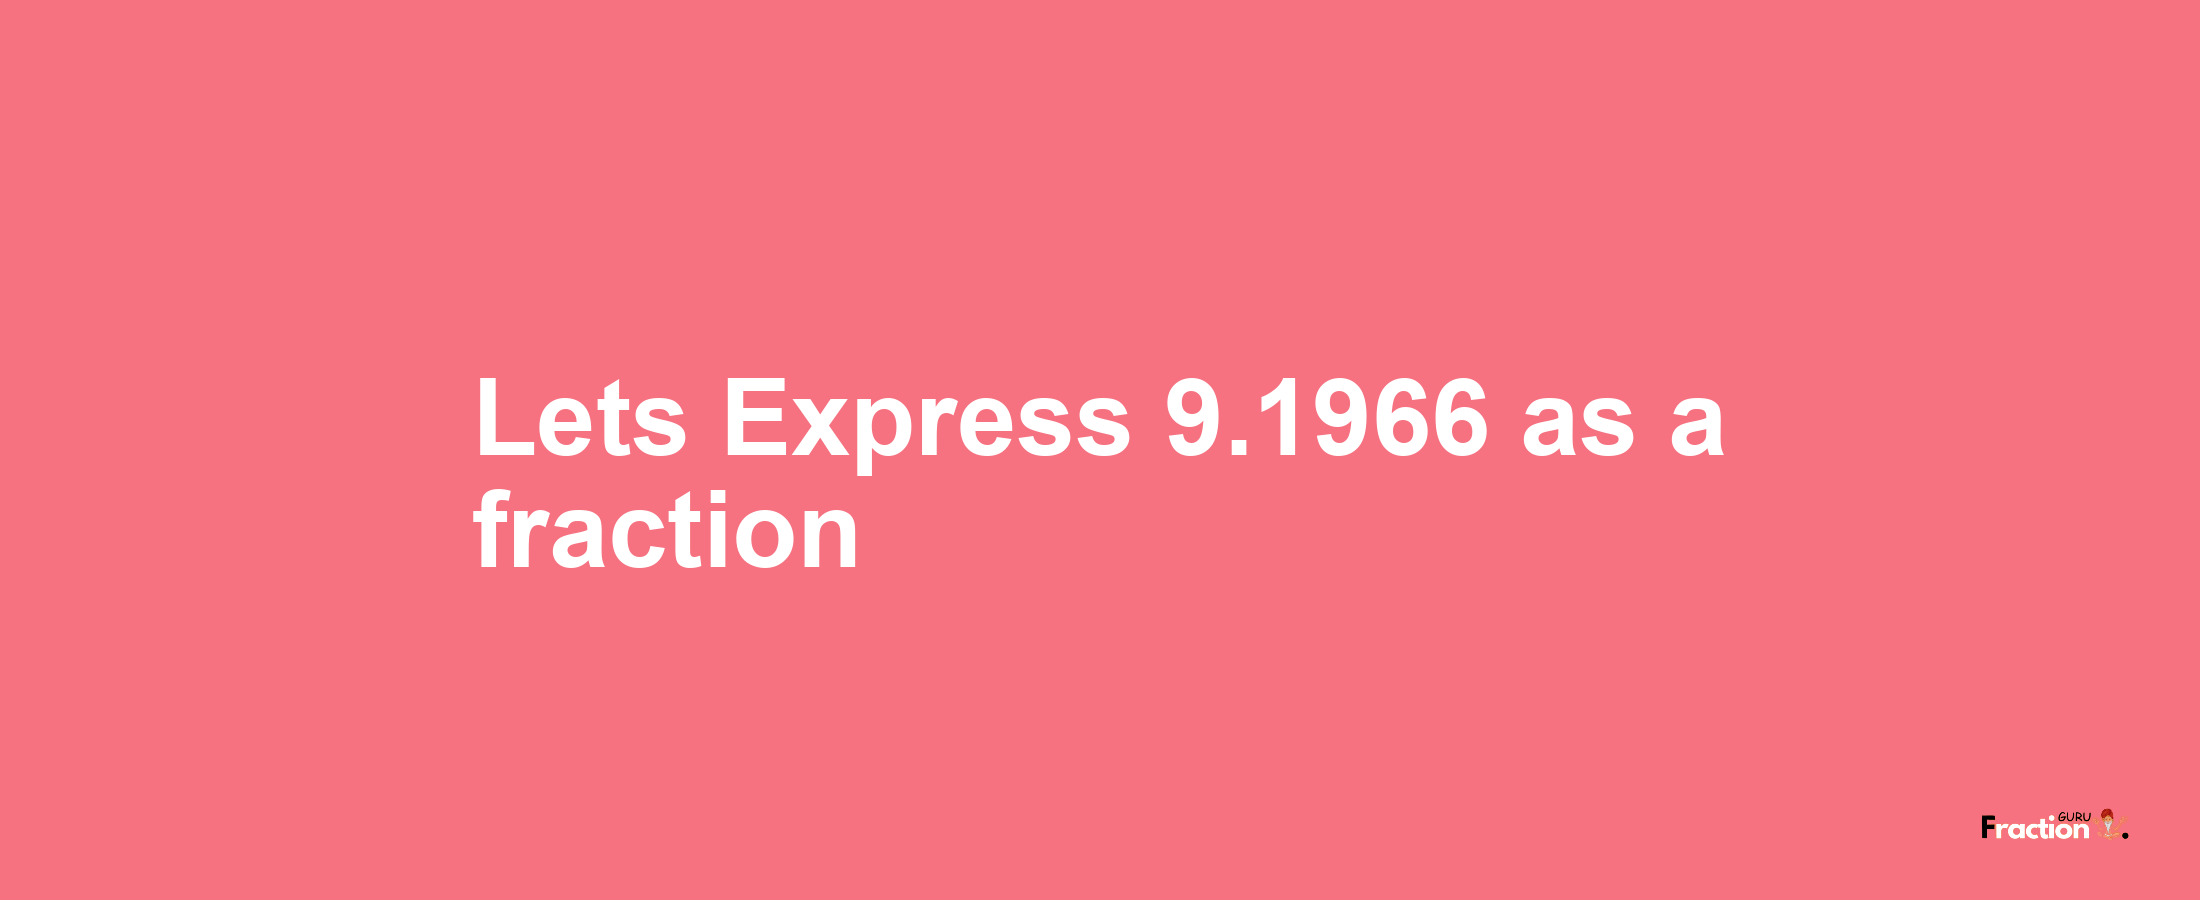 Lets Express 9.1966 as afraction